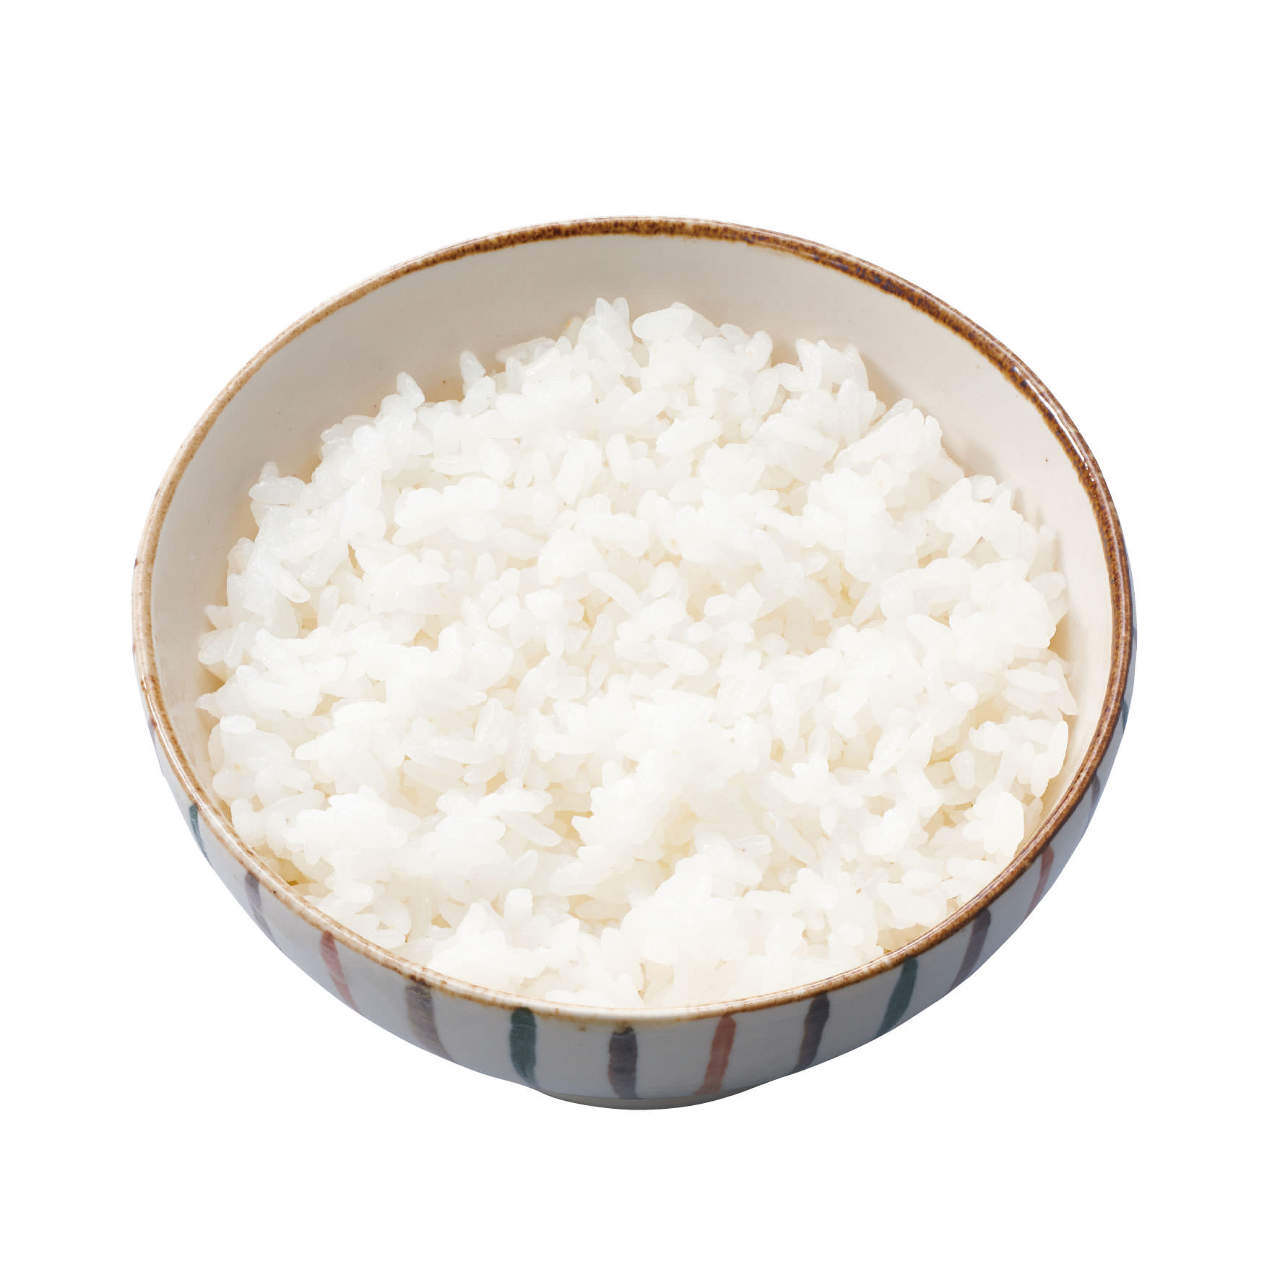 The 10 Best Rice in Japan